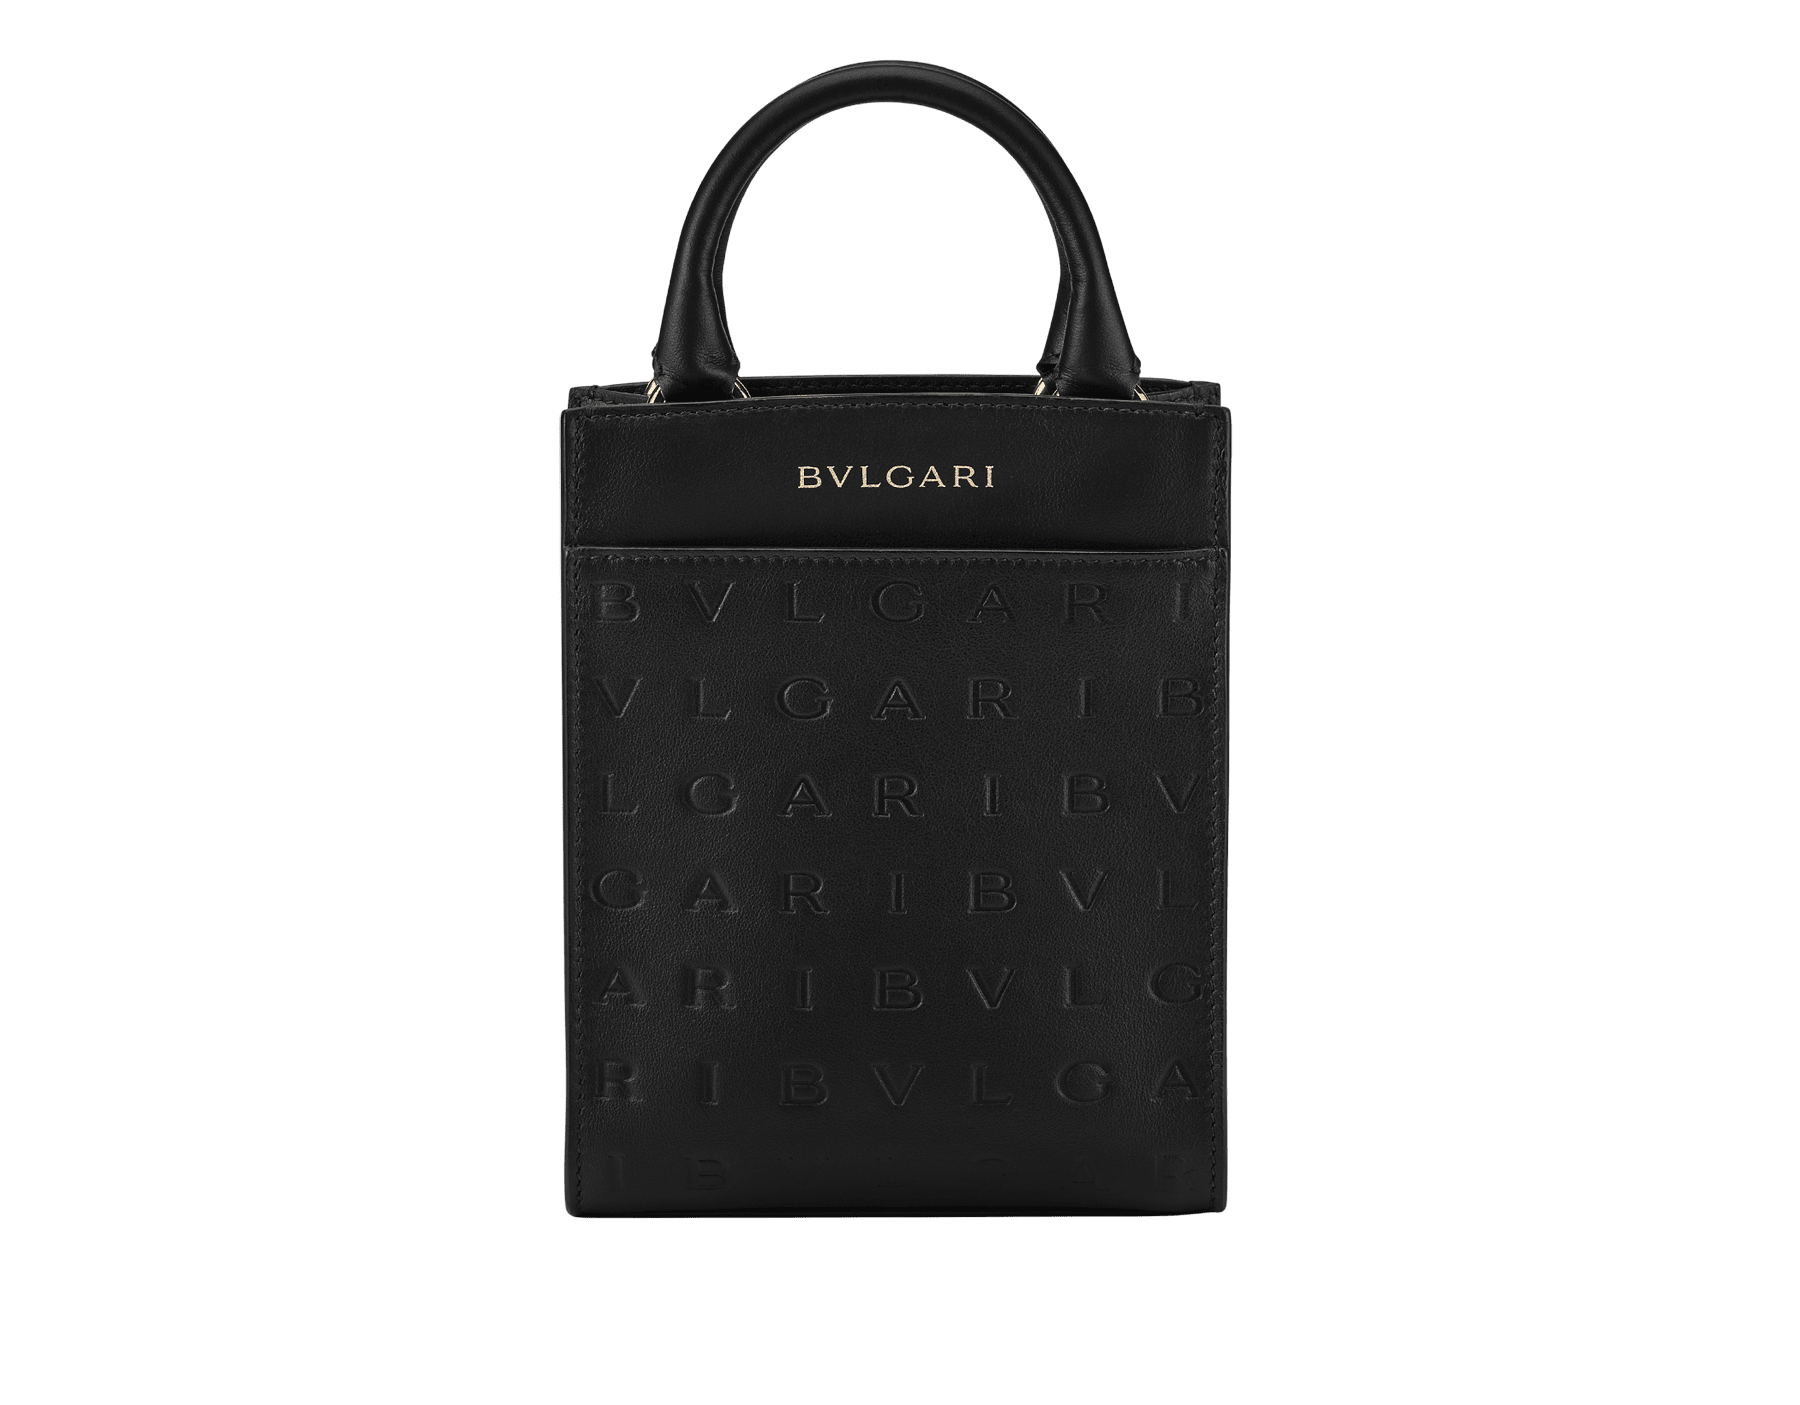 Bulgari Logo mini tote bag in black calf leather with hot-stamped Infinitum pattern and teal topaz green grosgrain lining. Light gold-plated brass hardware. BVL-1228S-ICLa image 1